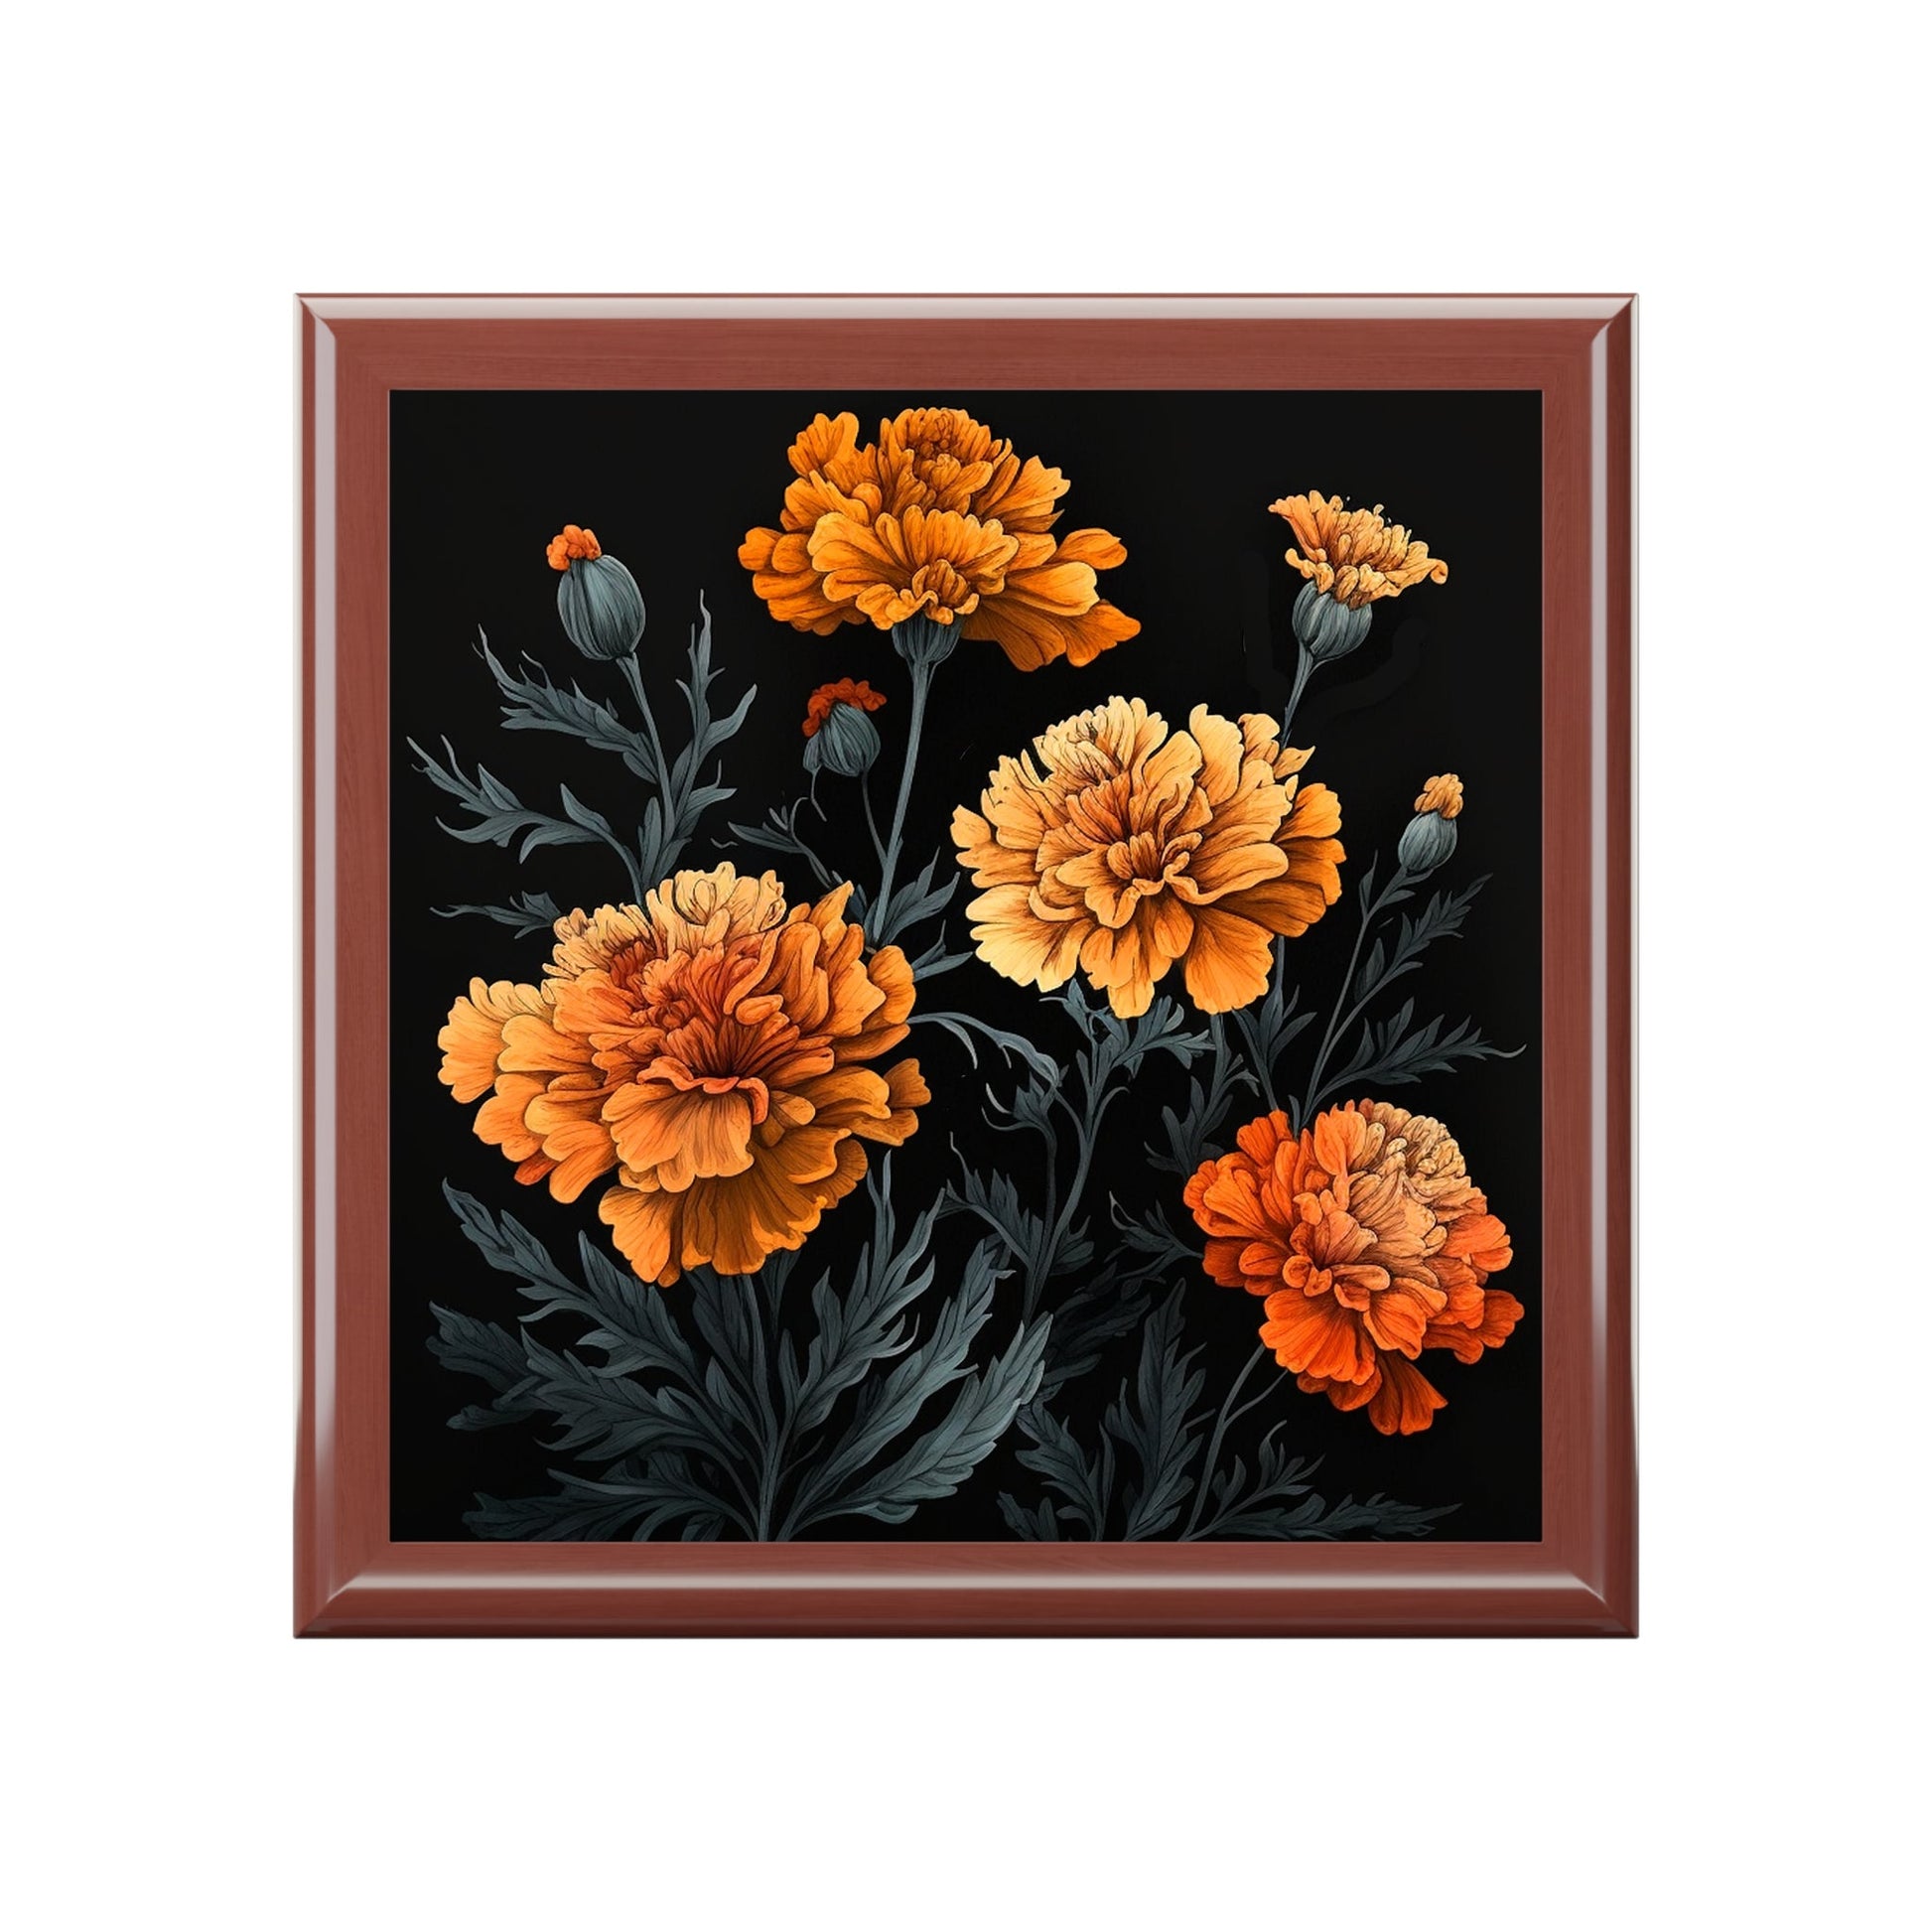 October Marigold Birth Month Flower Jewelry Keepsake Box - Jewelry Travel Case,Bridesmaid Proposal Gift,Bridal Party Gift,Jewelry Cas